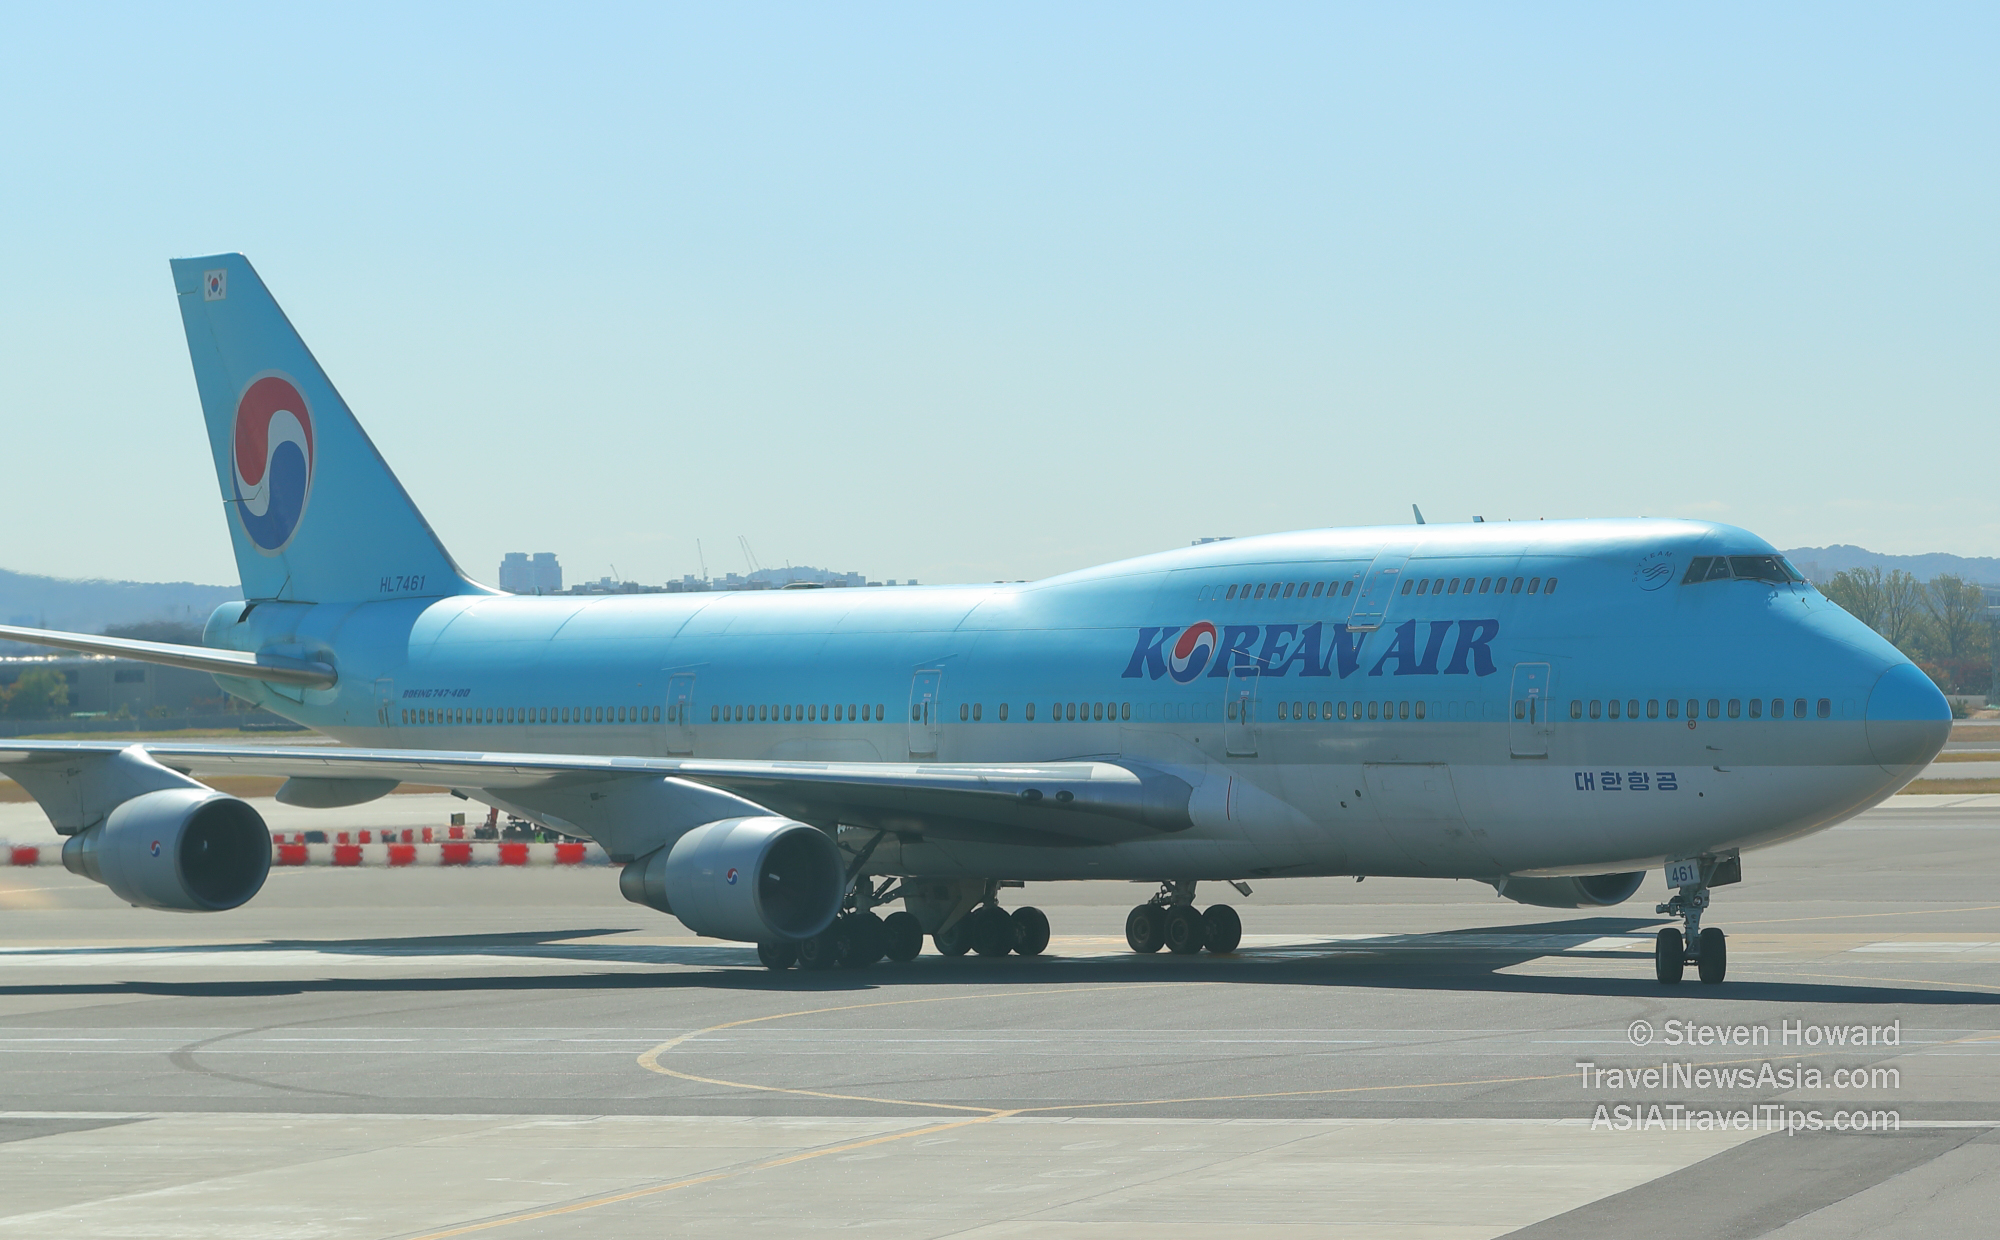 Korean Air Boeing 747-400. Picture by Steven Howard of TravelNewsAsia.com Click to enlarge.